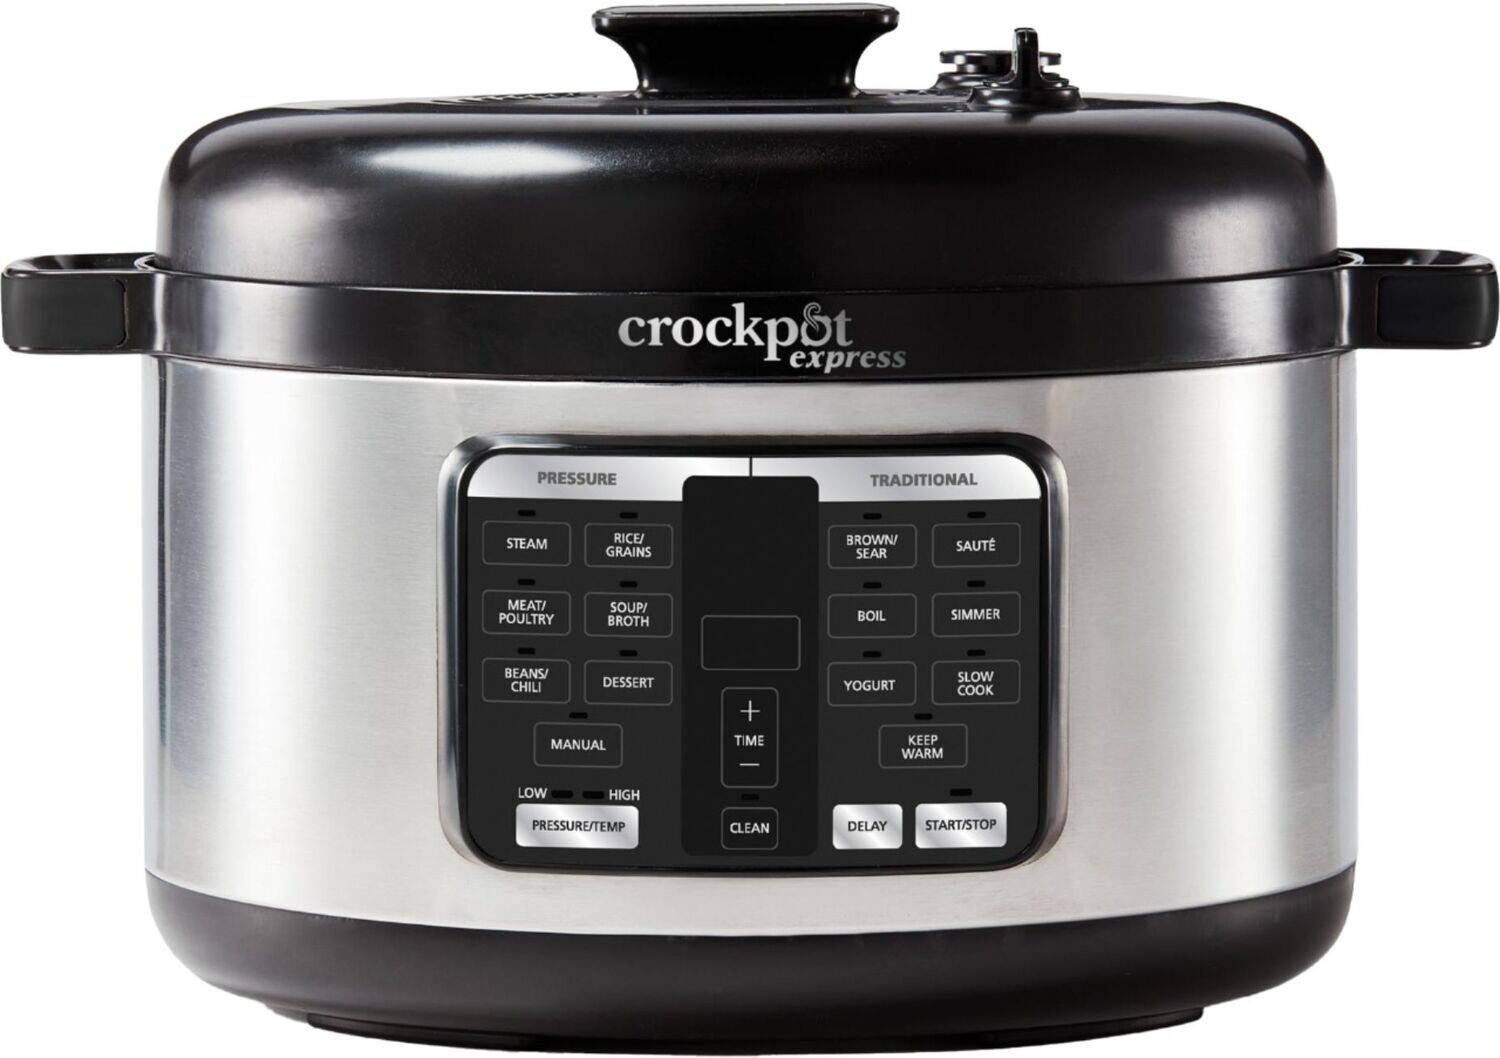 CE-307 CROCKPOT EXPRESS PRESSURE COOKER 6QT 9 IN 1 STAINLESS STEEL - CARIBE